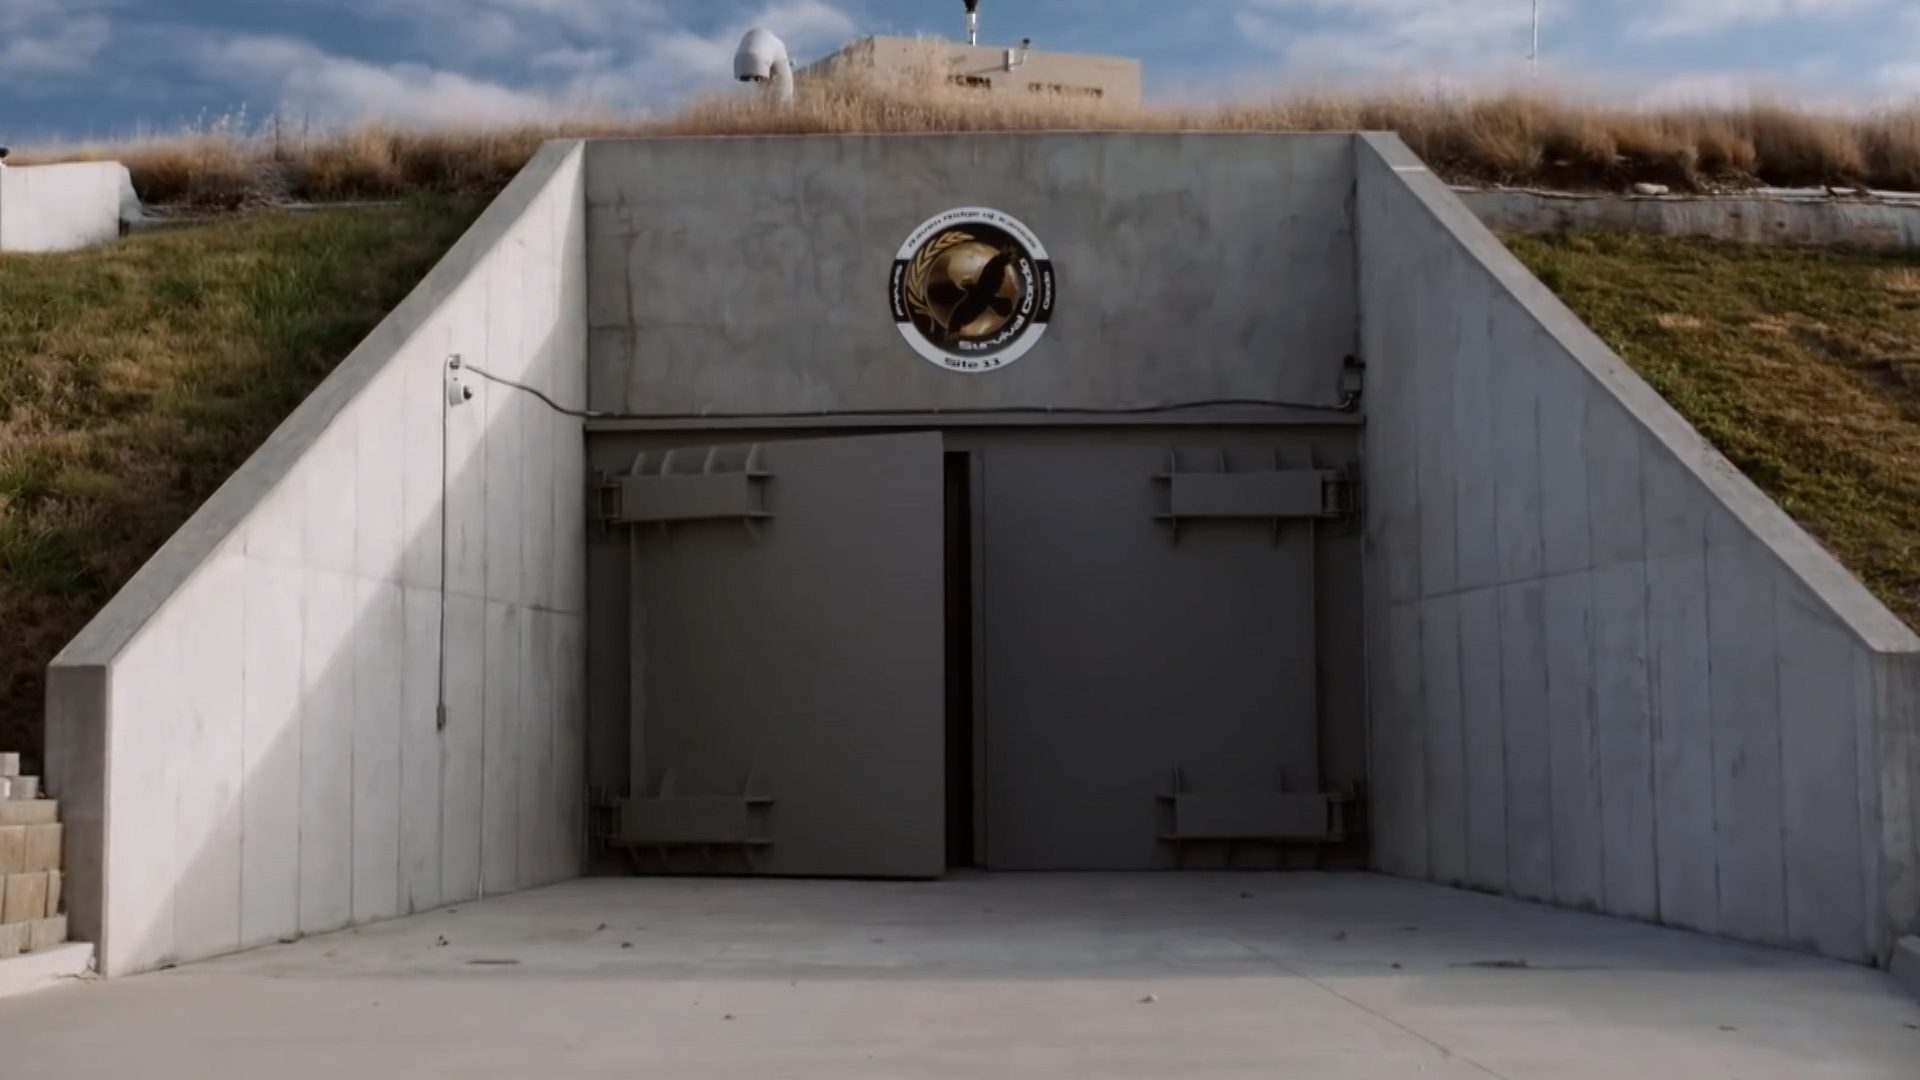 Billionaires Are Building Luxury Bunkers to Escape Doomsday